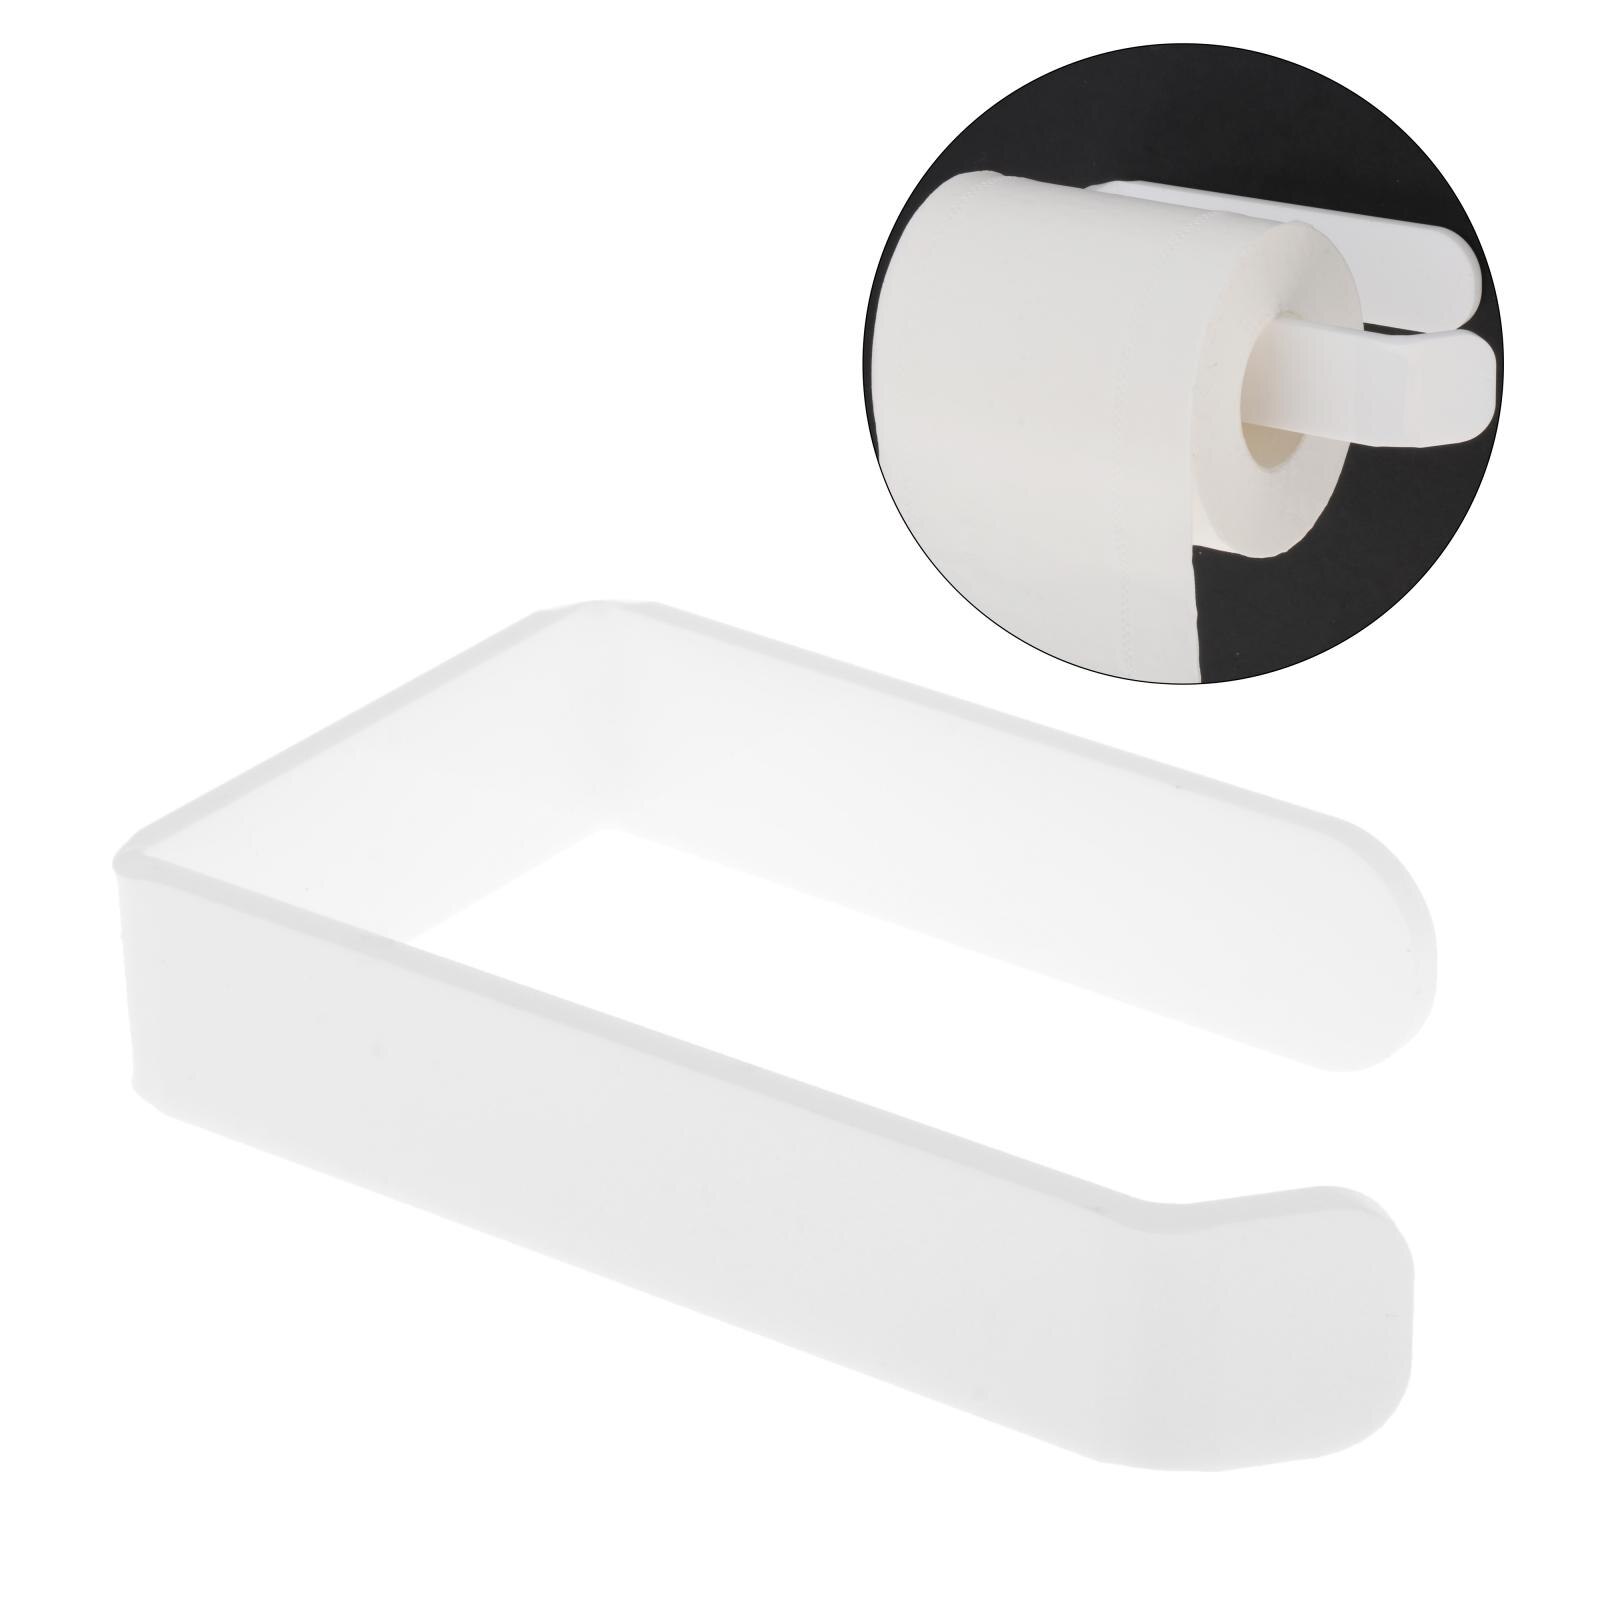 Wall Mount Paper Holder, White Acrylic Toilet Tissue Roll Holders Hangers for Bathroom Kitchen Easy to Install for Wall Tile